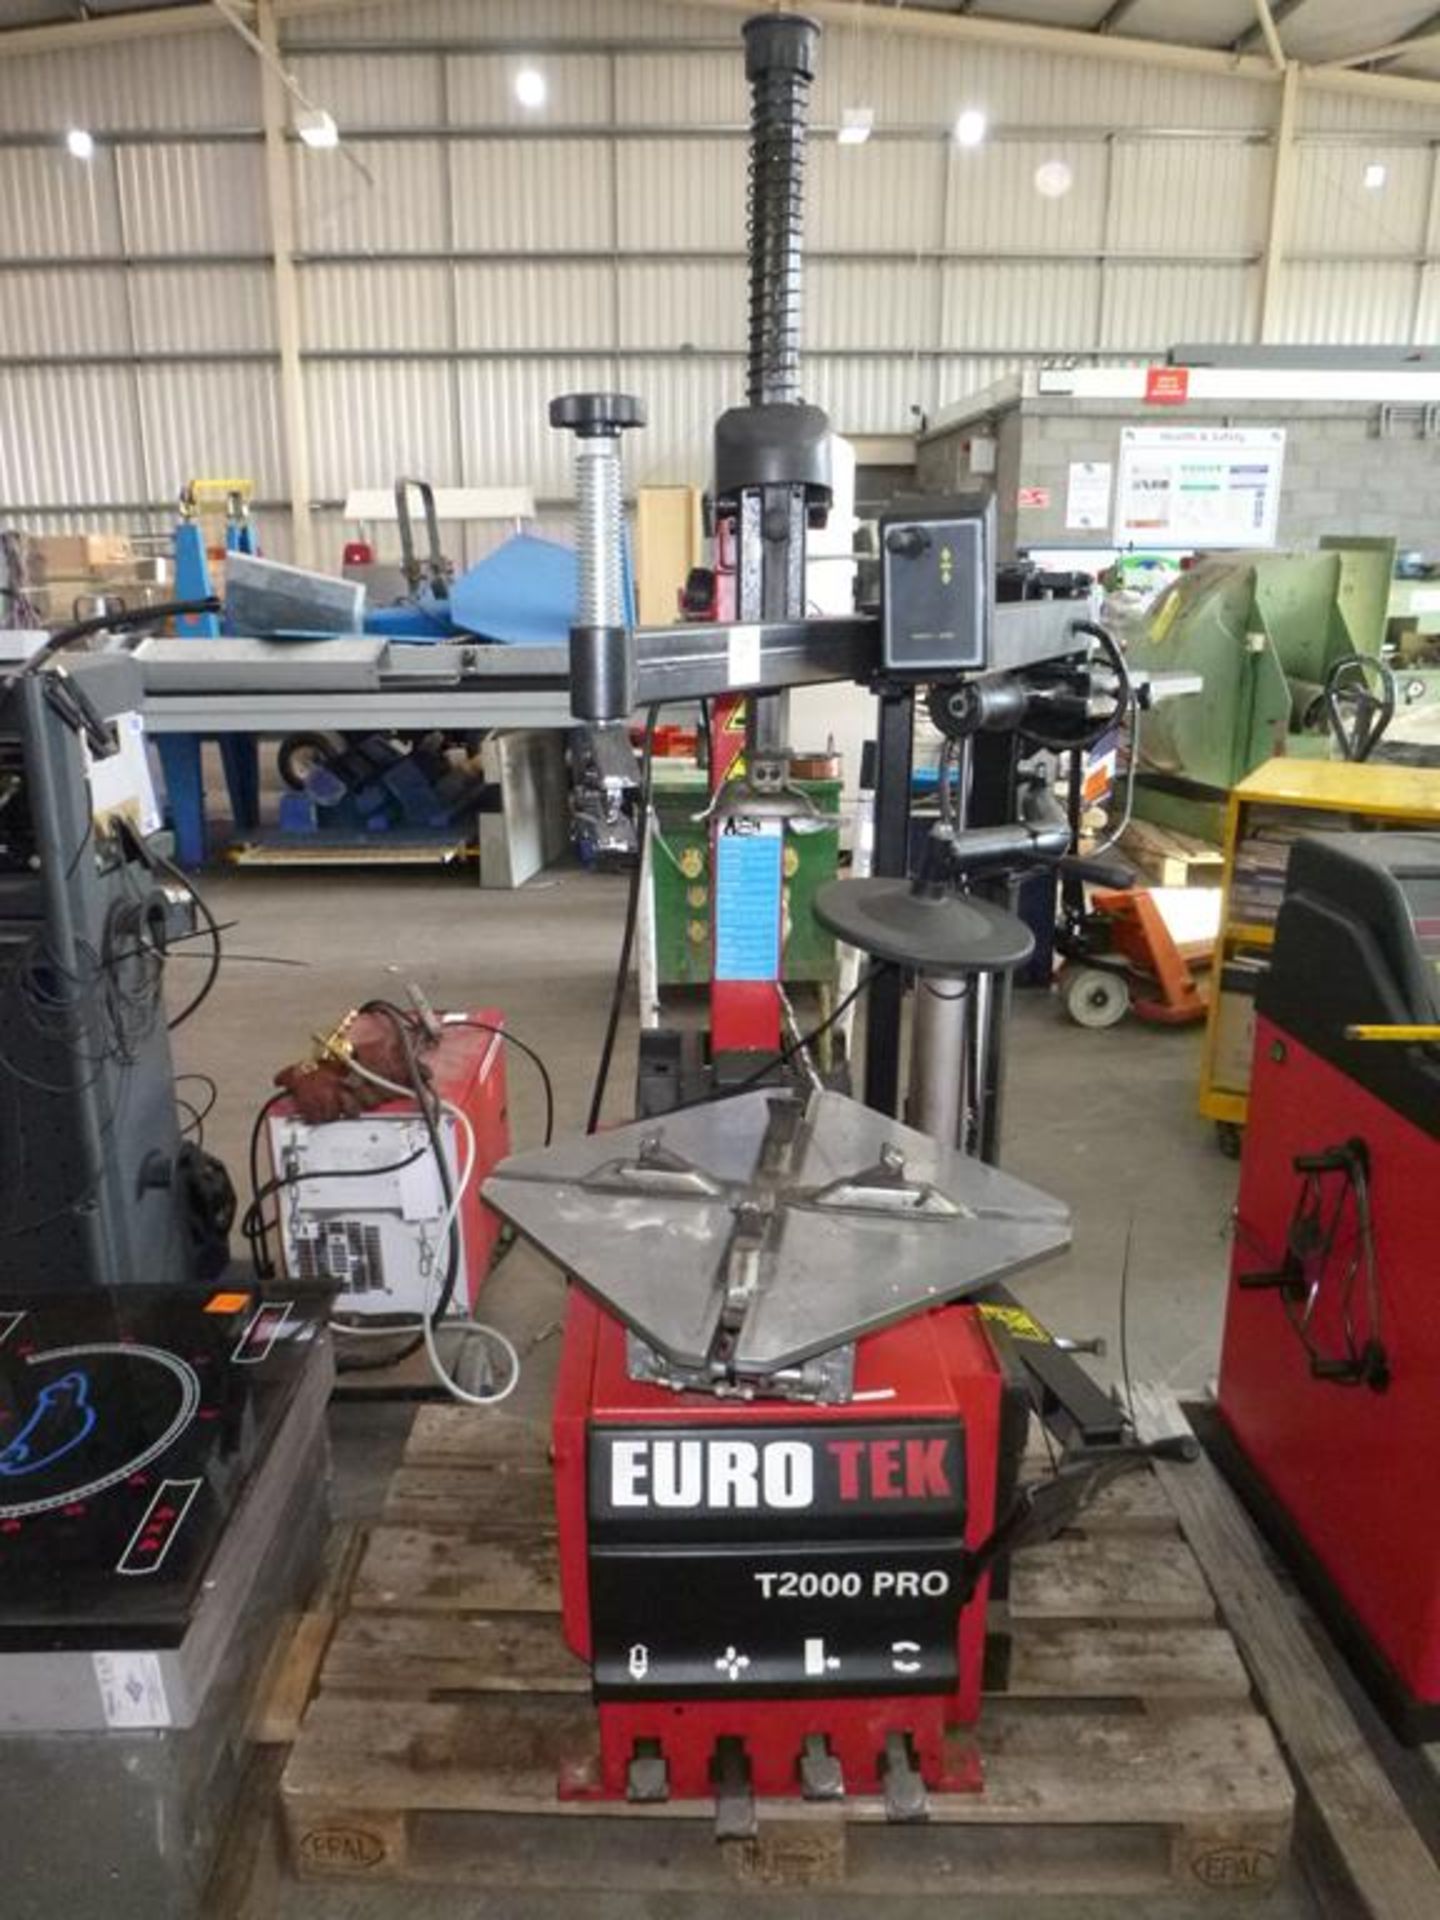 * A Eurotek T2000 Pro Tyre Changing Machine 240V. Please note there is a £5 plus VAT Lift Out Fee on